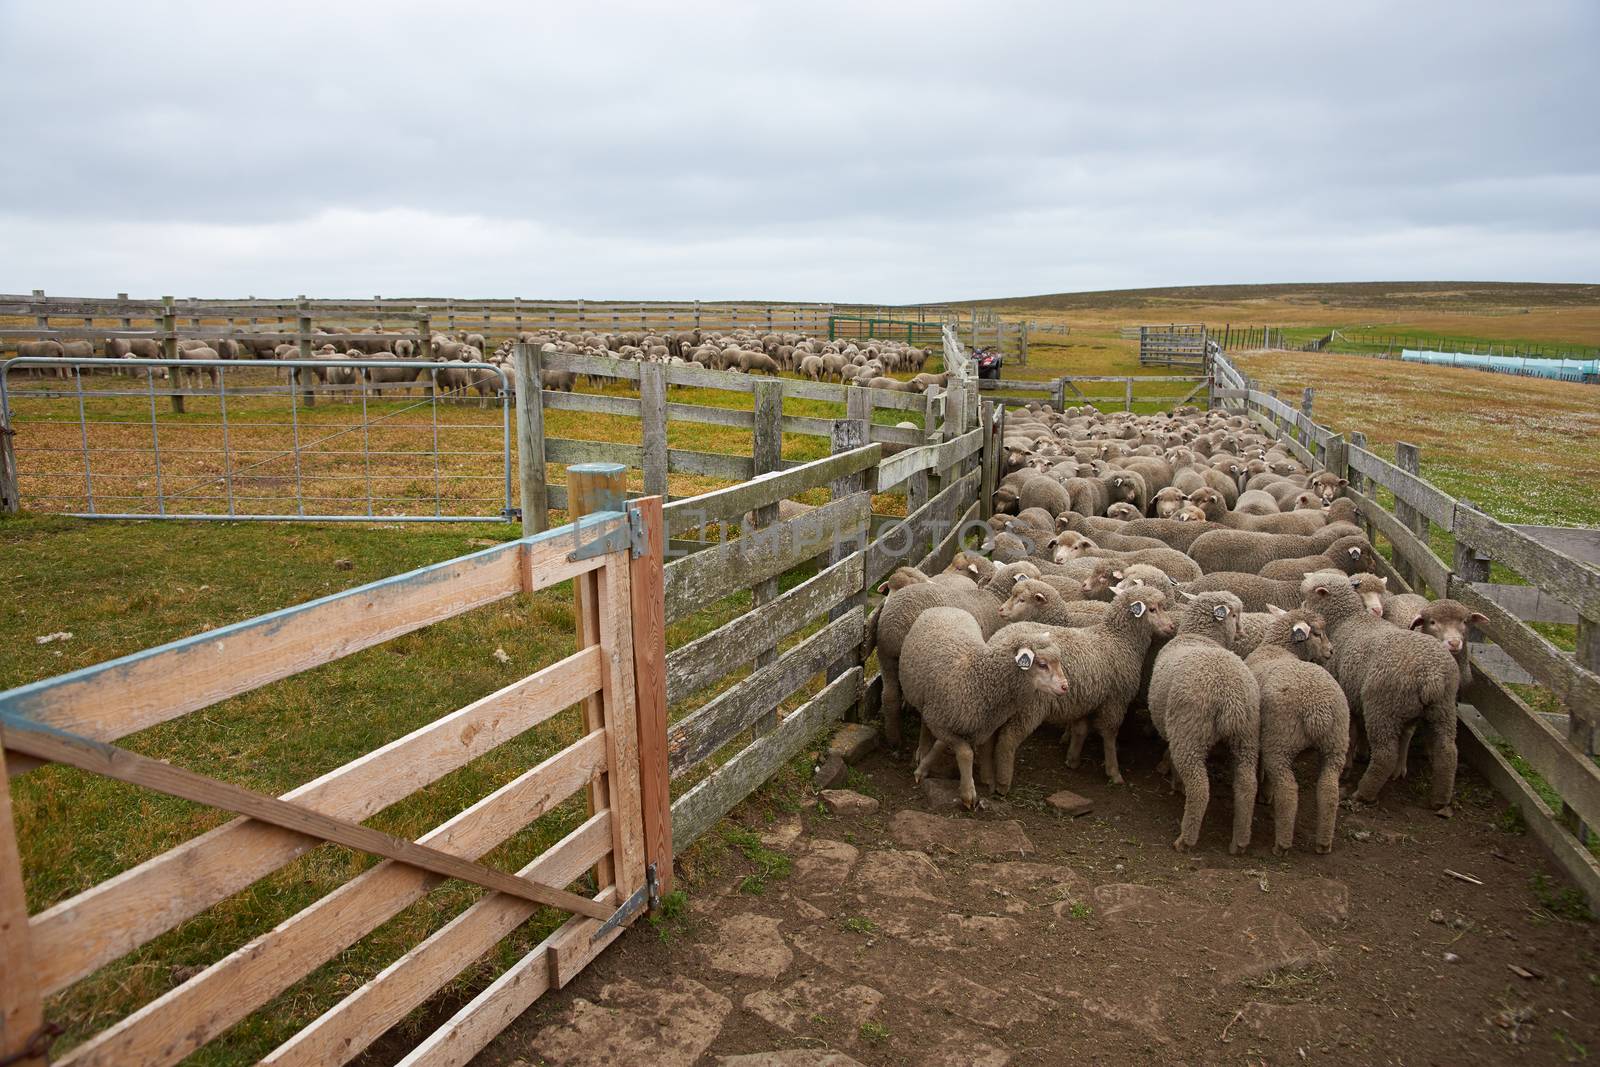 Flock of sheep in a wooden corral of a farm on Bleaker Island in the Falkland Islands.